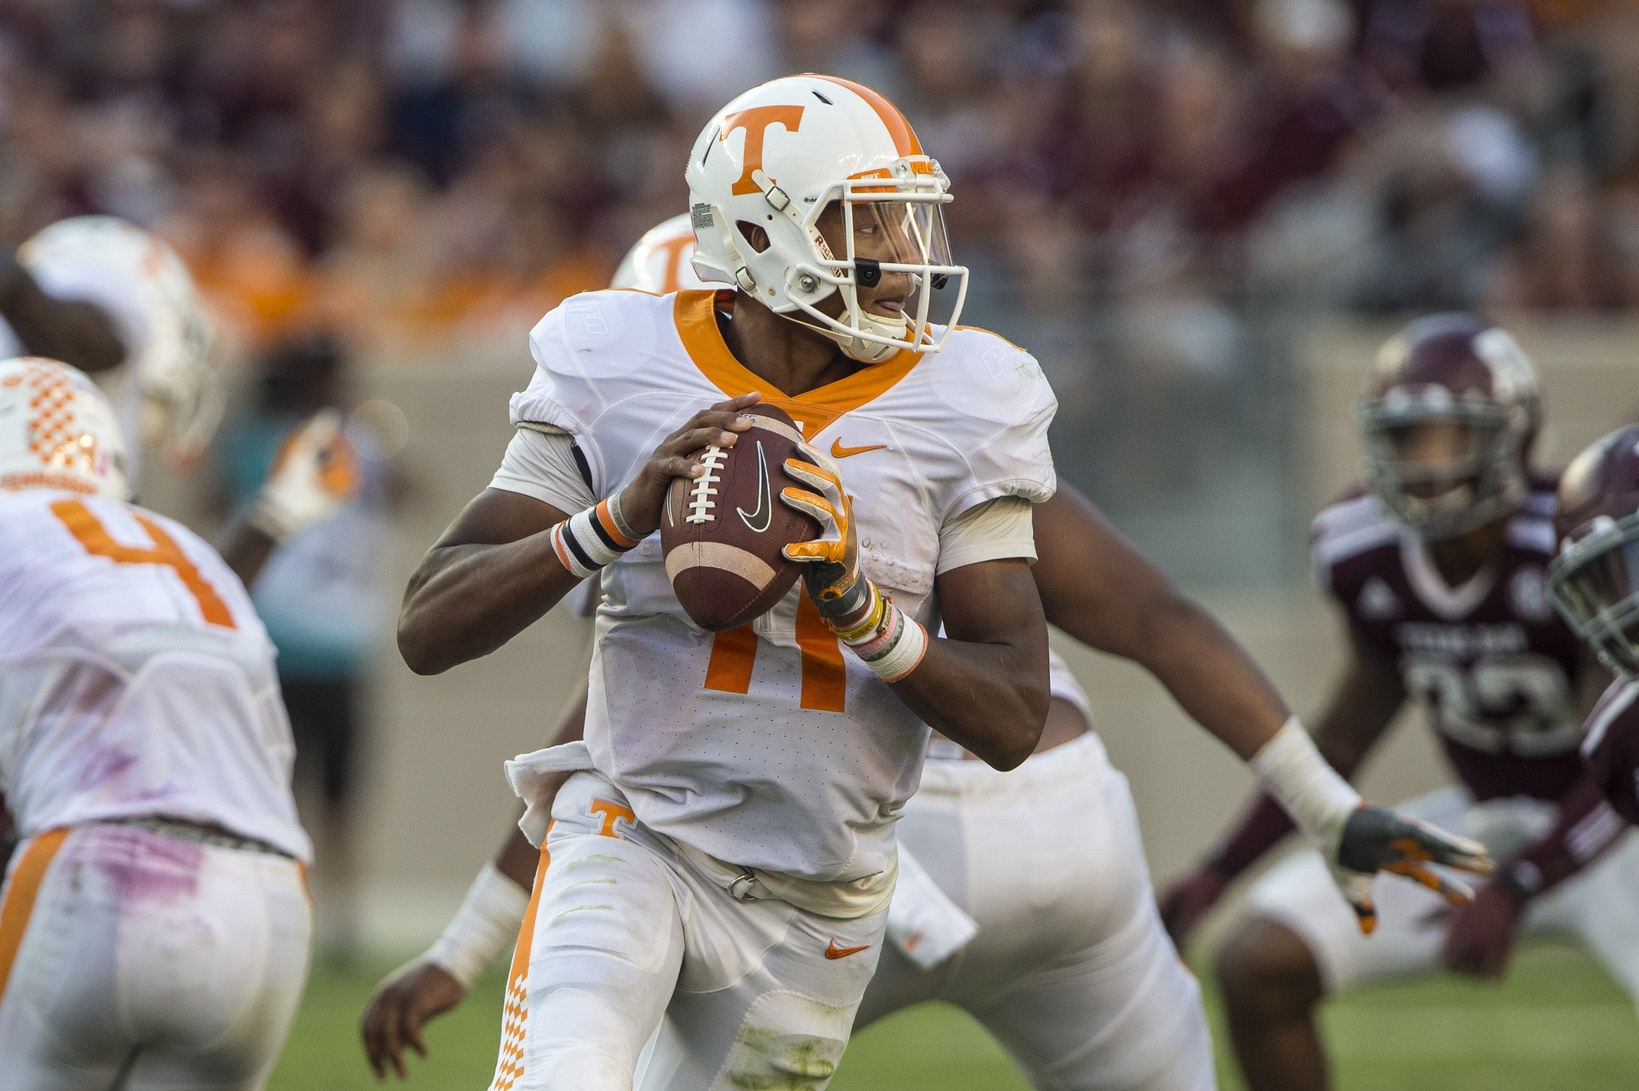 Oct 8, 2016; College Station, TX, USA; Tennessee Volunteers quarterback Joshua Dobbs (11) rolls out to pass against the Texas A&M Aggies during the second half at Kyle Field. The Aggies defeated the Volunteers 45-38 in overtime. Mandatory Credit: Jerome Miron-USA TODAY Sports